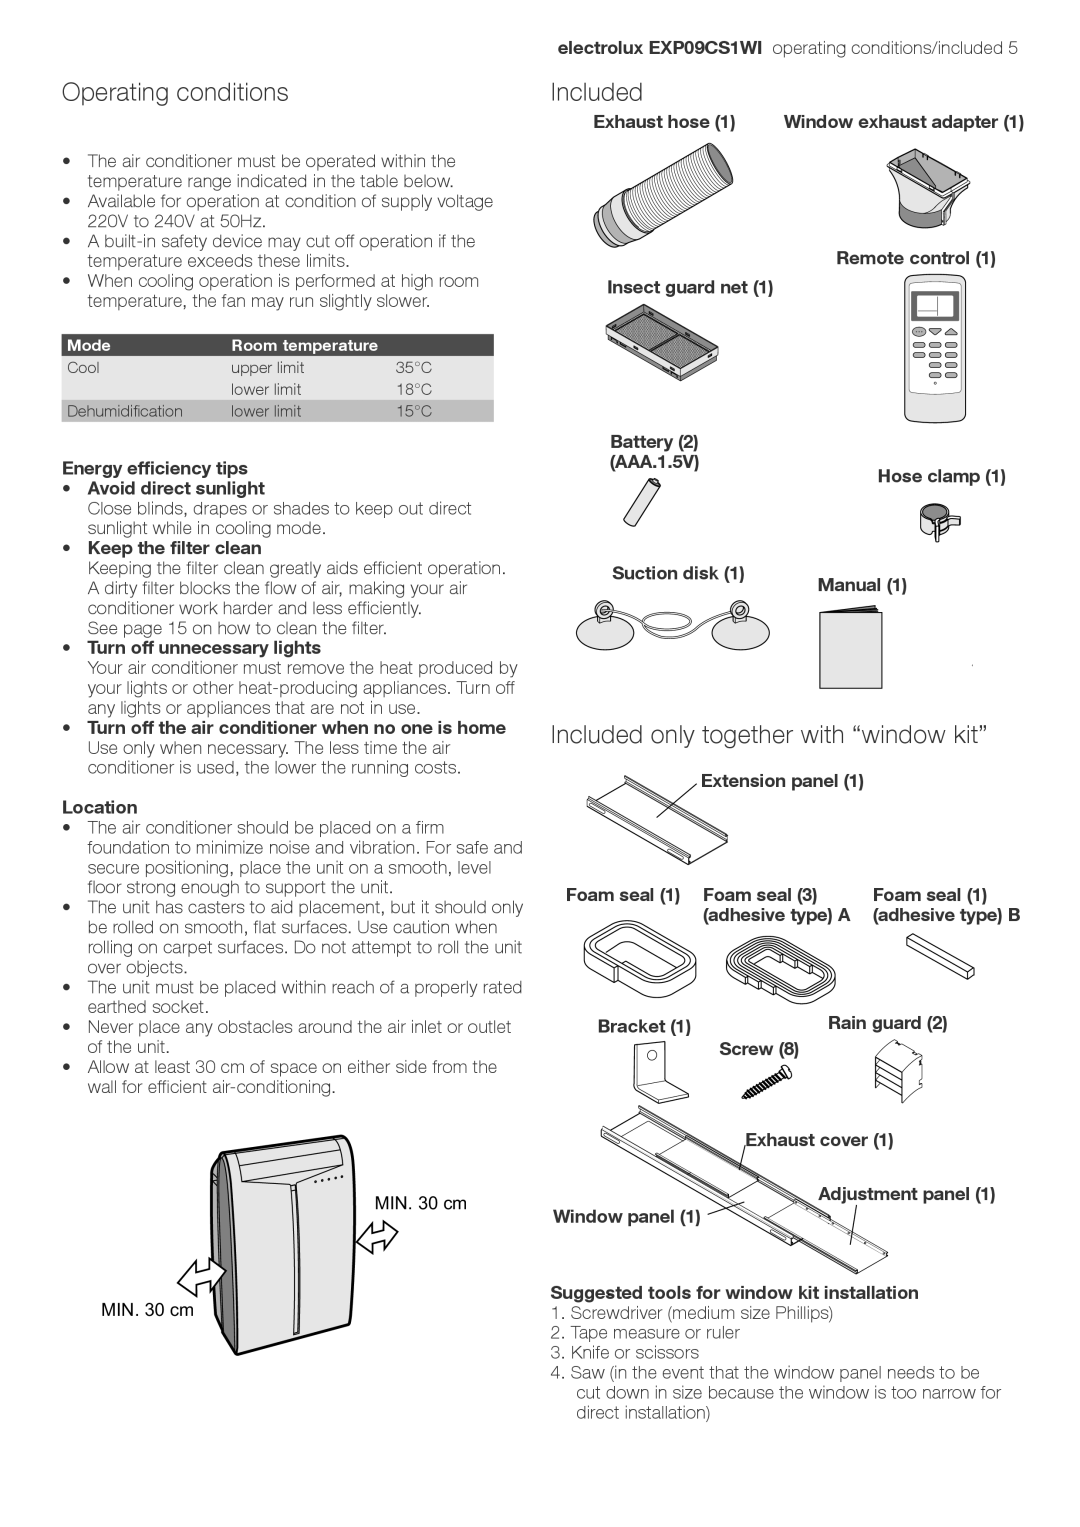 Electrolux LU4 9QQ user manual Operating conditions, Included only together with “window kit” 